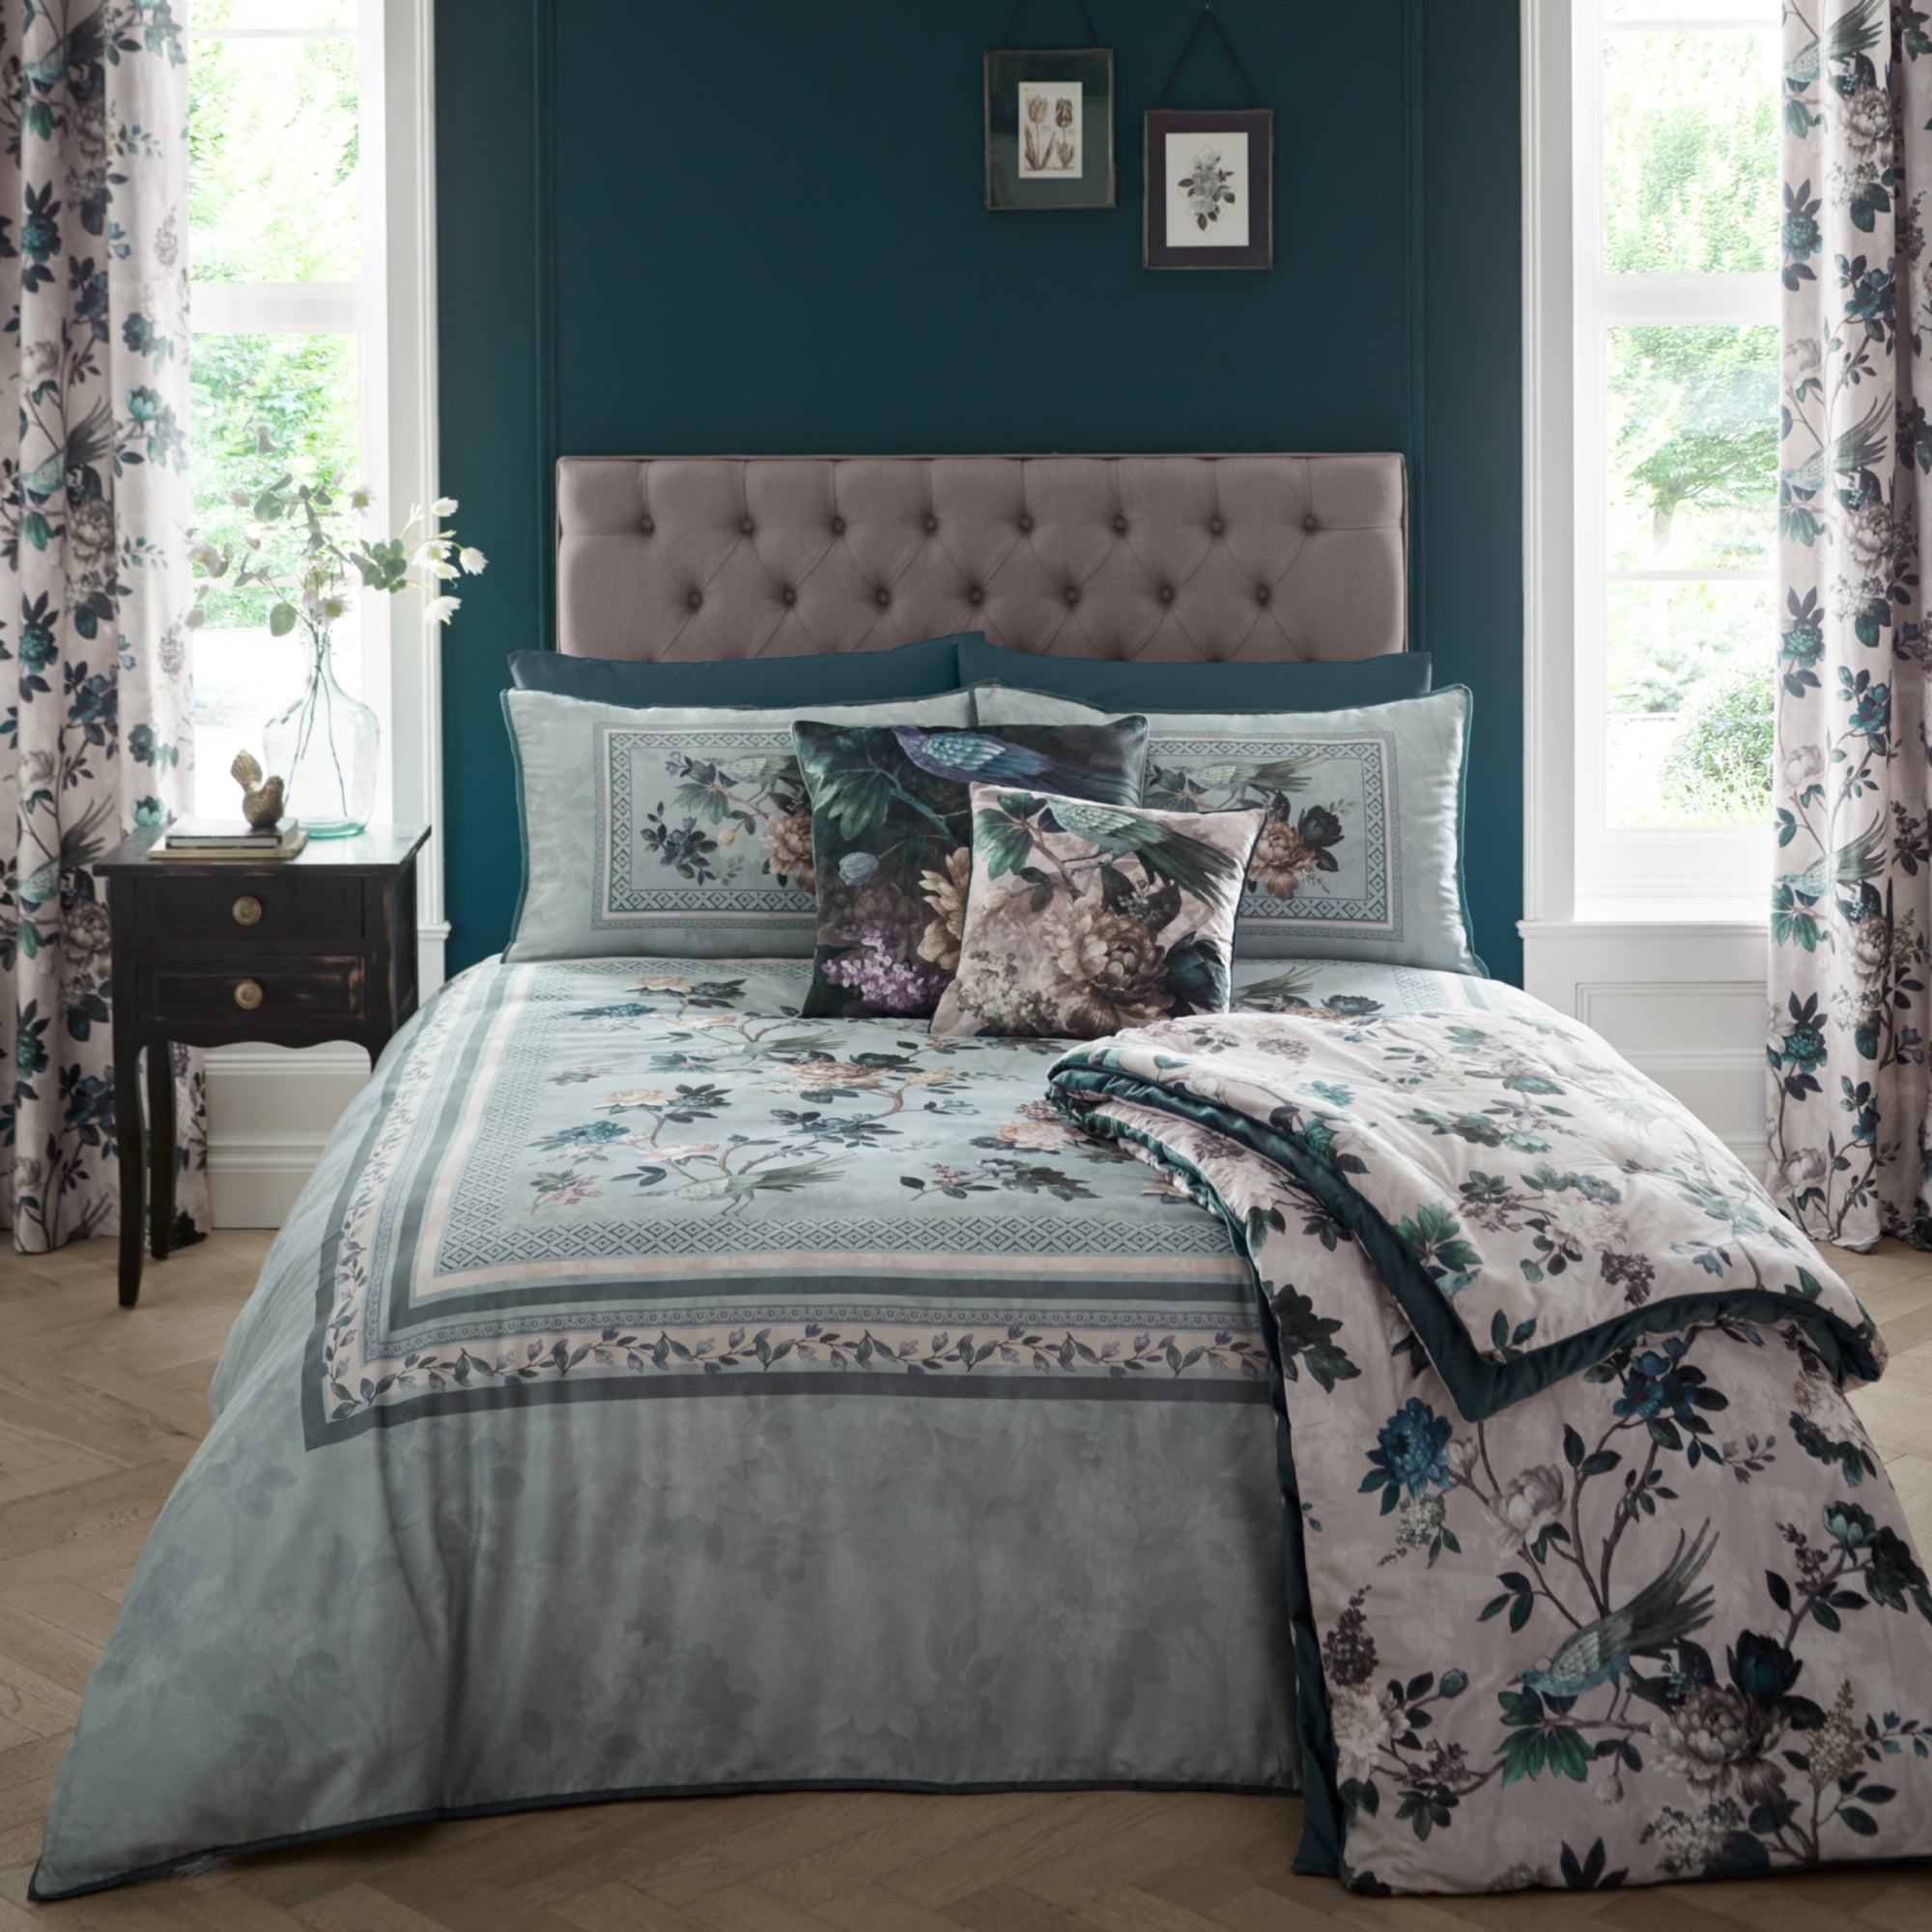 Duvet Cover Set Windsford by Appletree Heritage in Teal